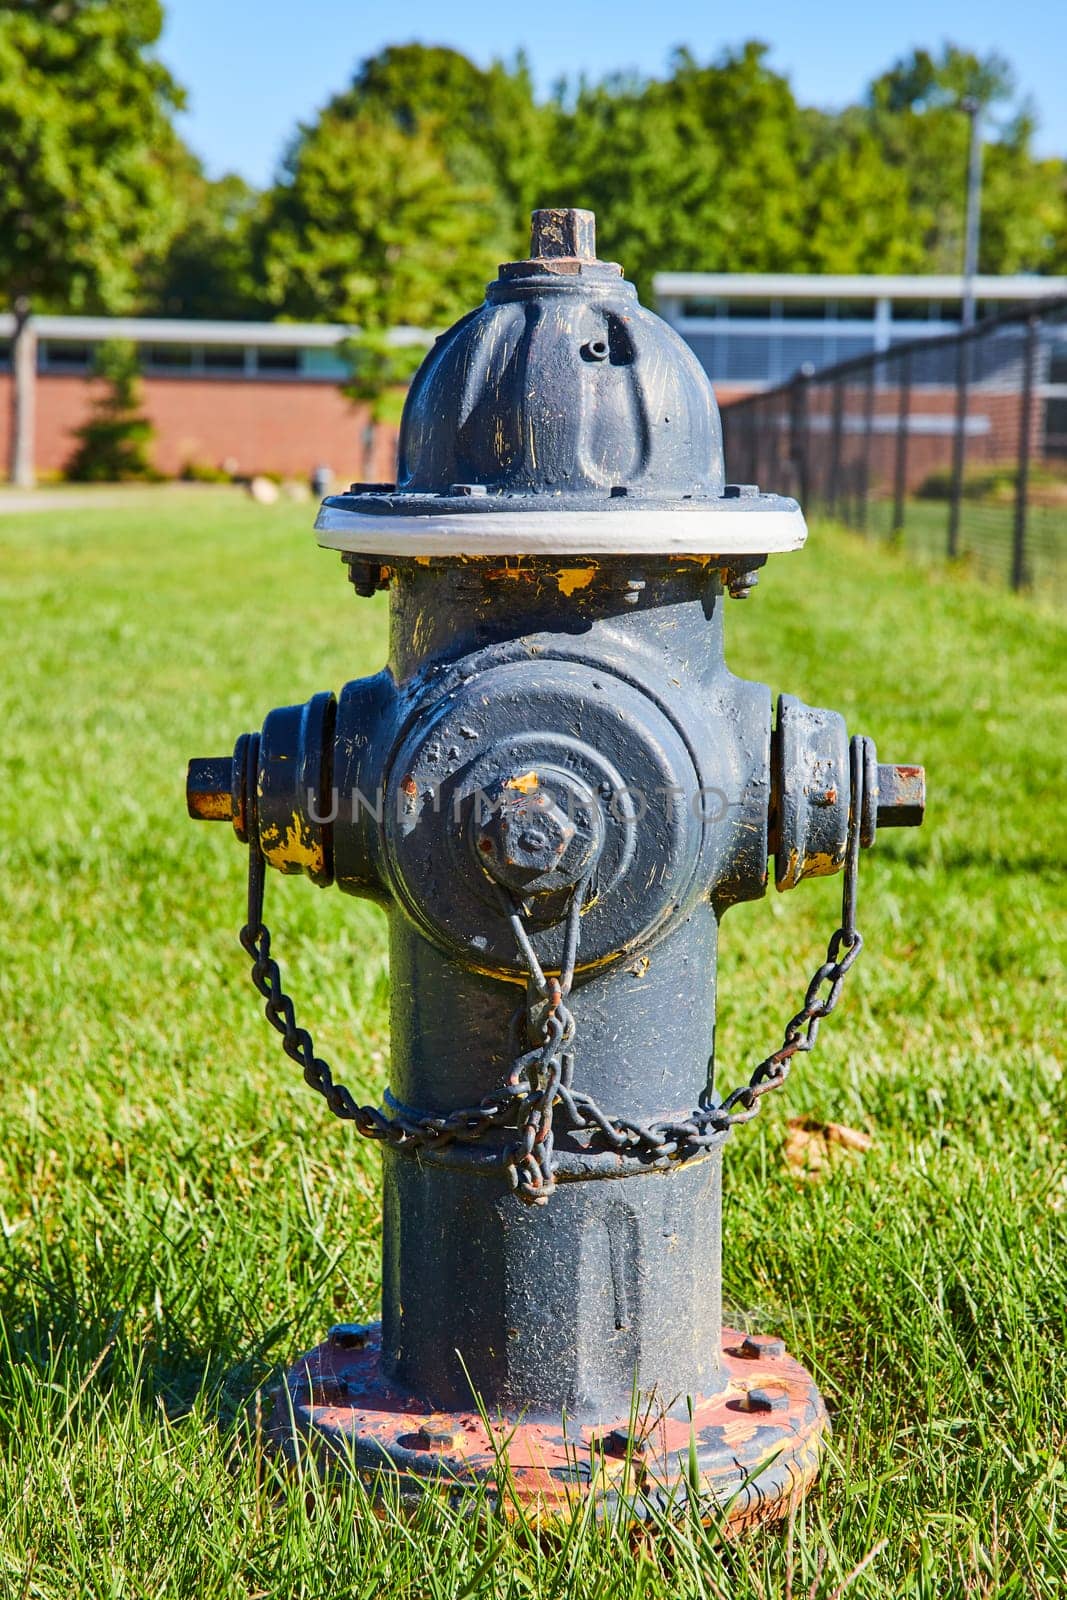 Blue, weathered fire hydrant stands guard in a sunny suburban setting, Muncie, Indiana, 2023 - a symbol of public safety and enduring urban infrastructure.